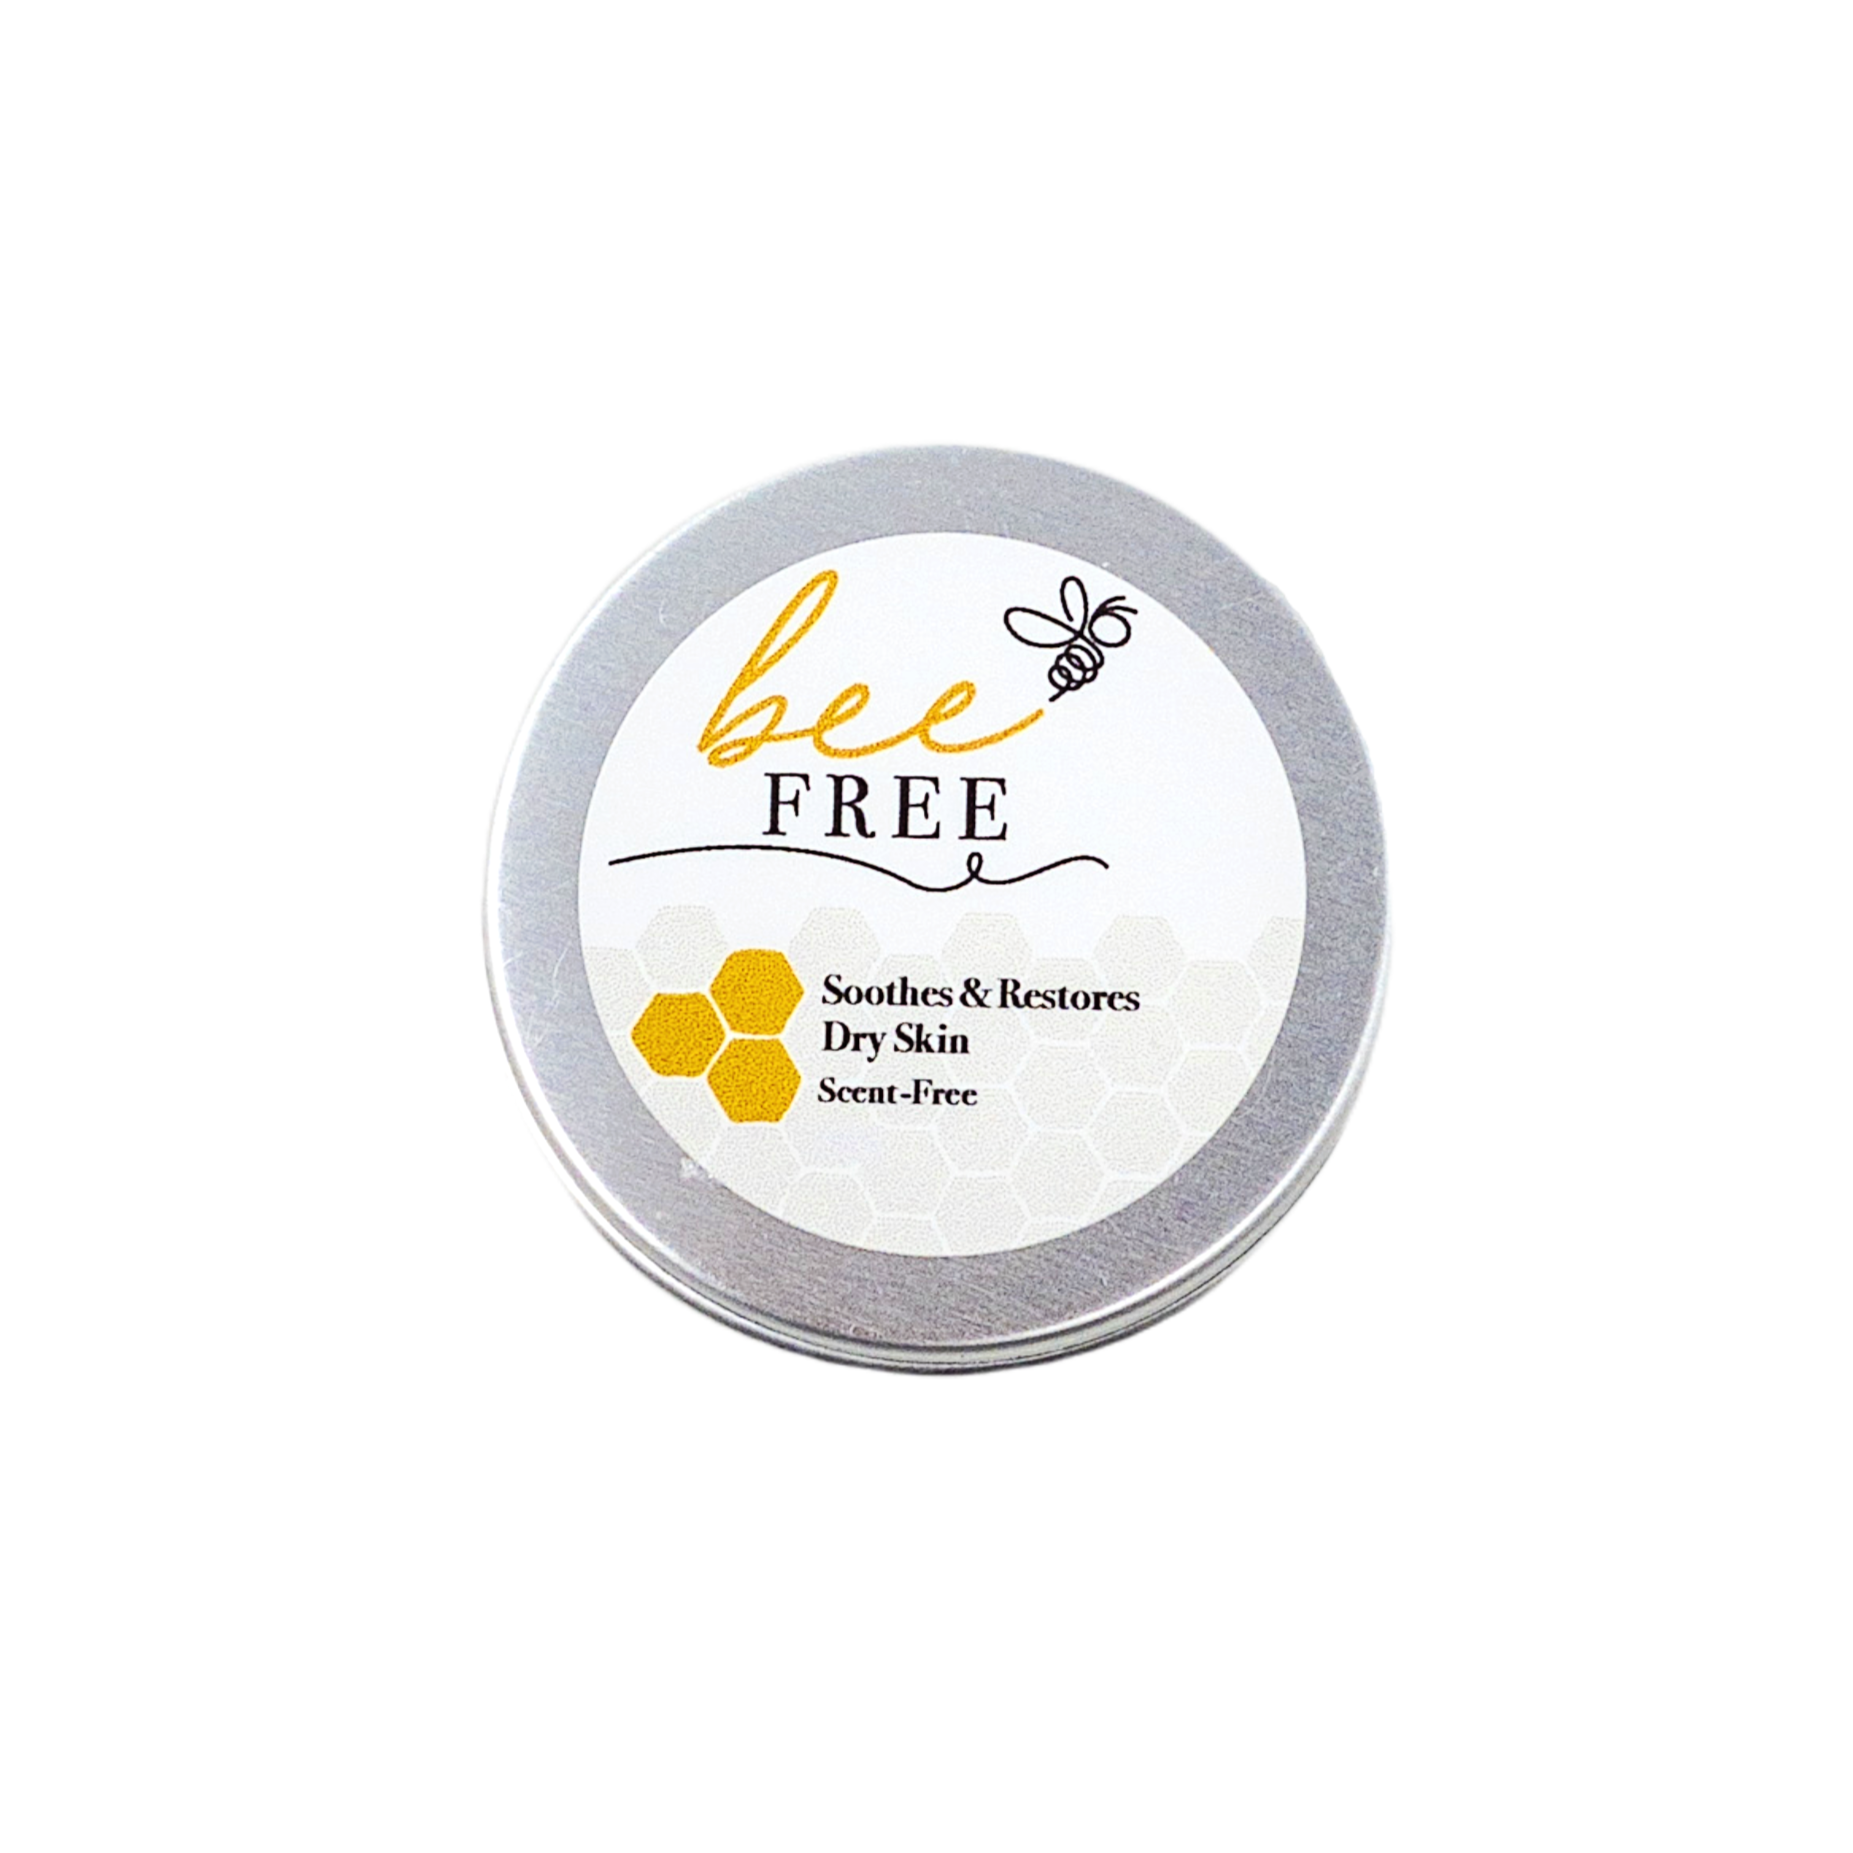 Bee Free - Soothes & Restores Dry Skin - Unscented Travel Size.